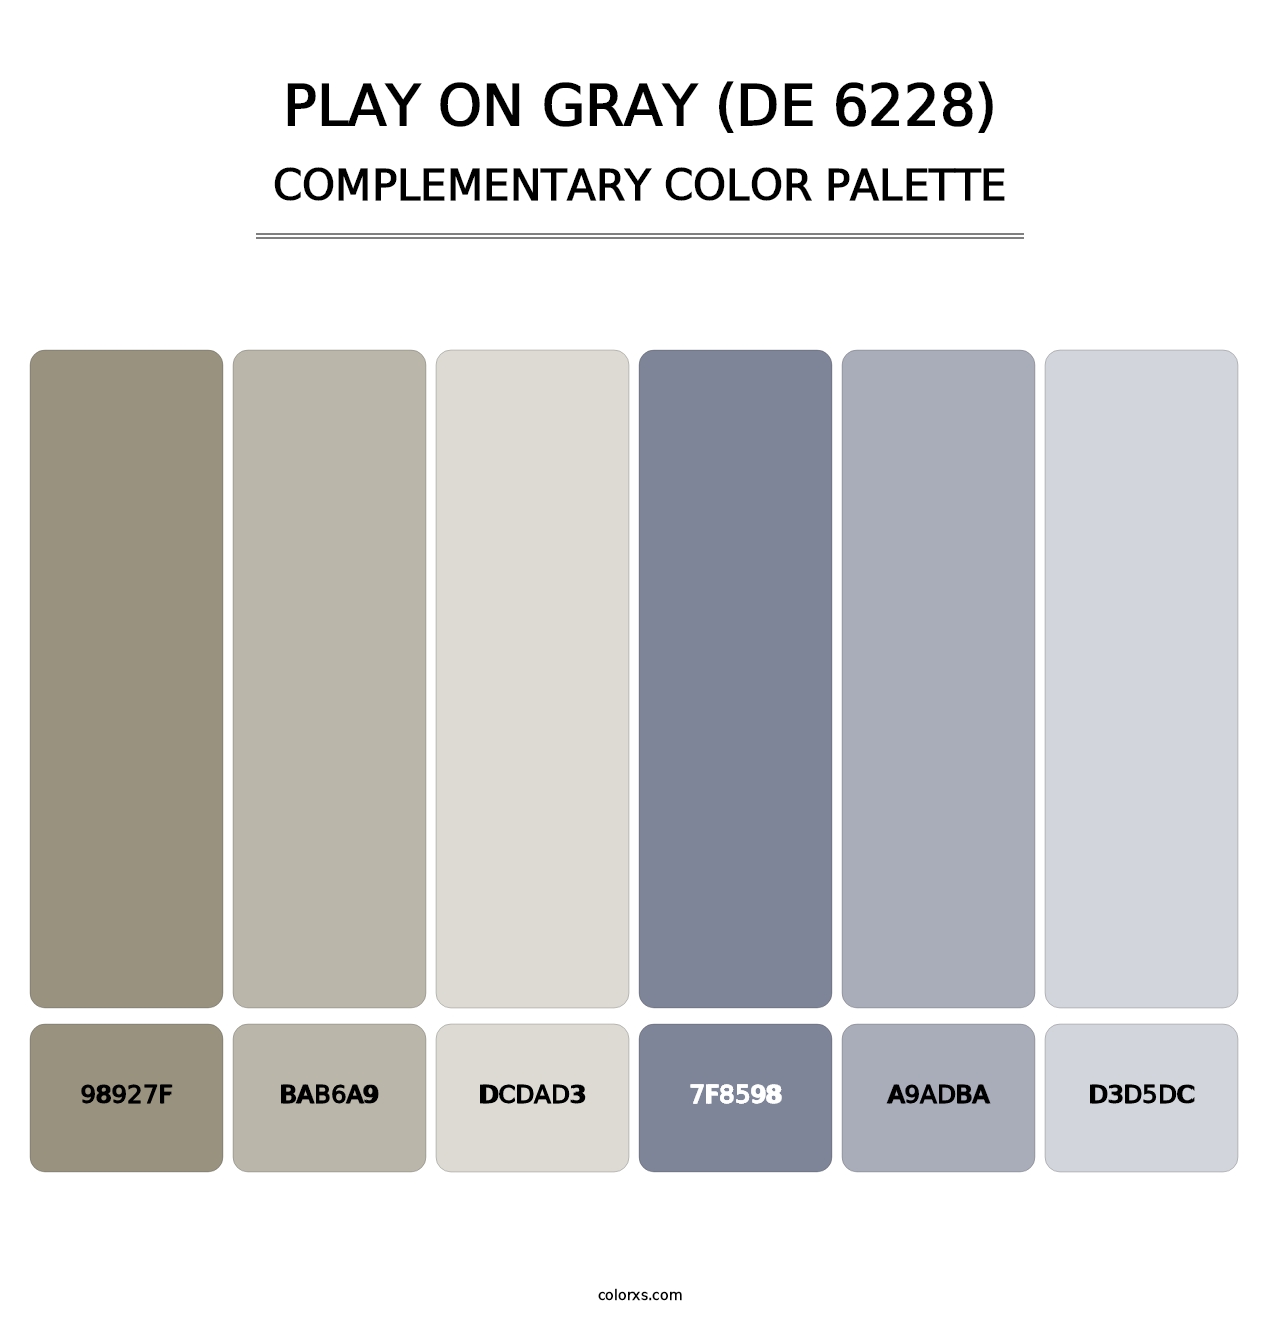 Play on Gray (DE 6228) - Complementary Color Palette